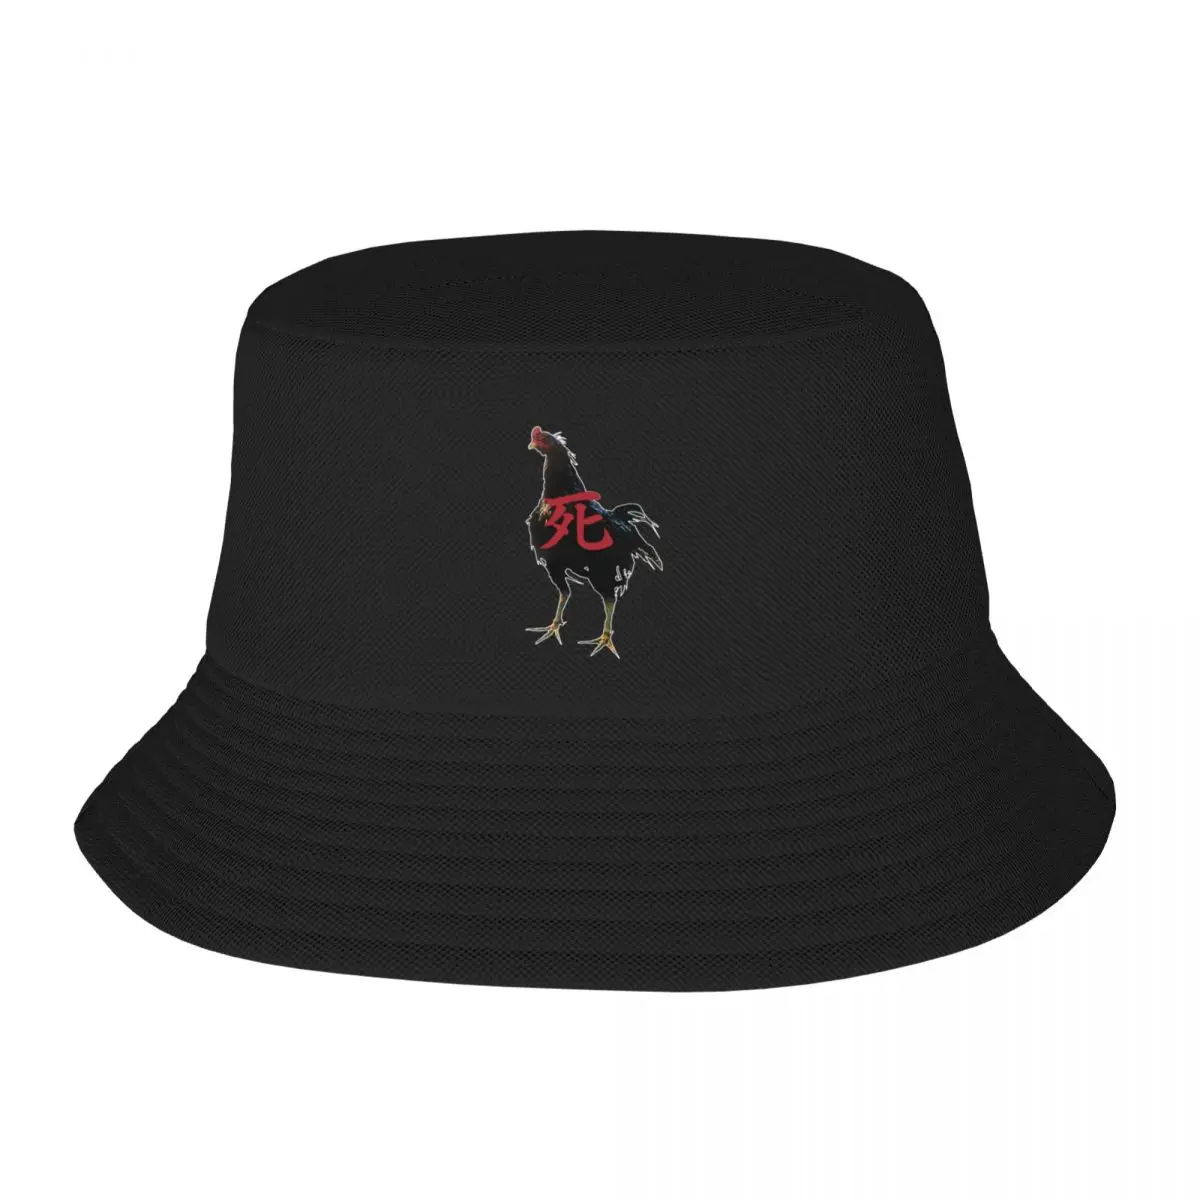 

New Rooster Premium The One Armed Wolf Sekiro A Shadows Die Twice Game Interesting Bucket Hat summer hats Hat For Men Women's